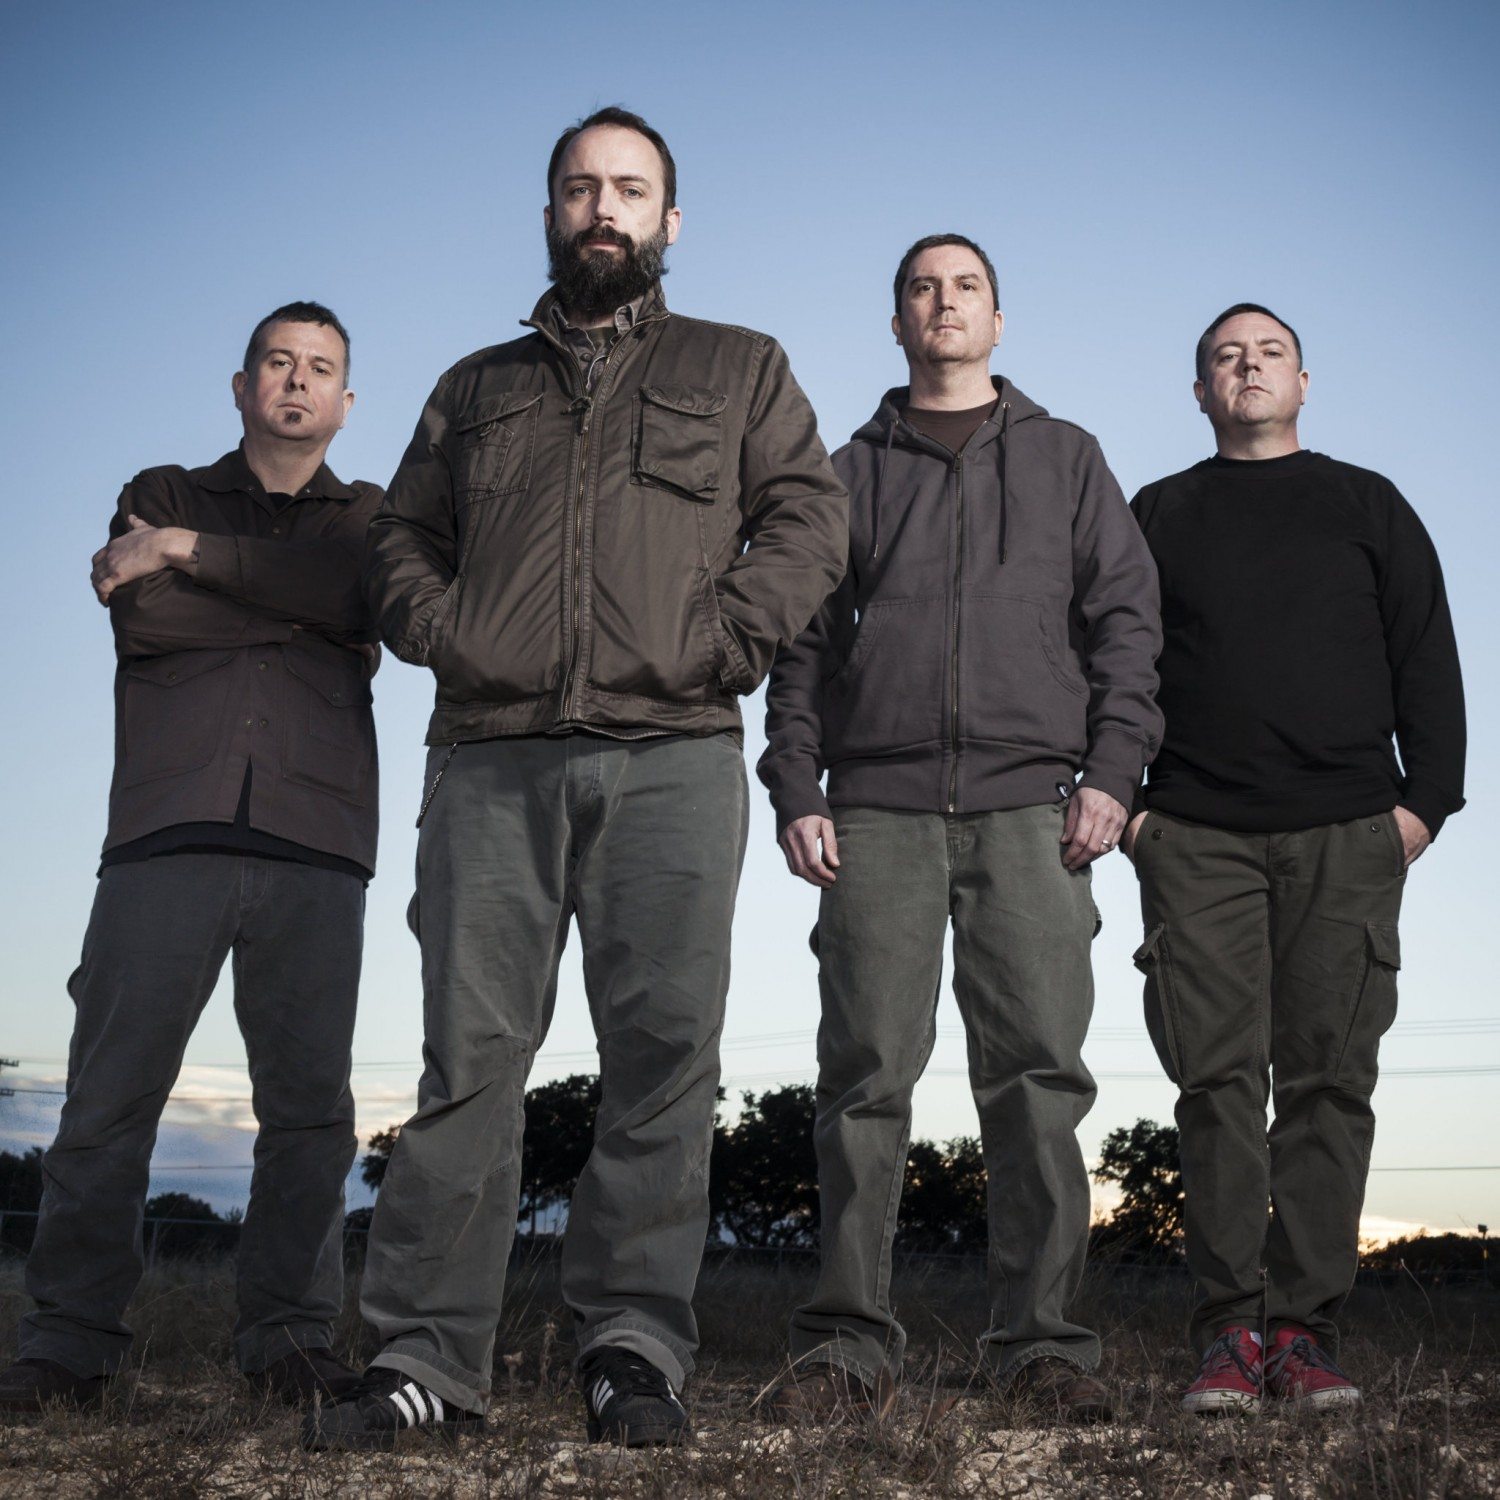 Clutch’s Dan Maines is ready for Terminal 5, talks “Psychic Warfare” and nearly 25 years of rock